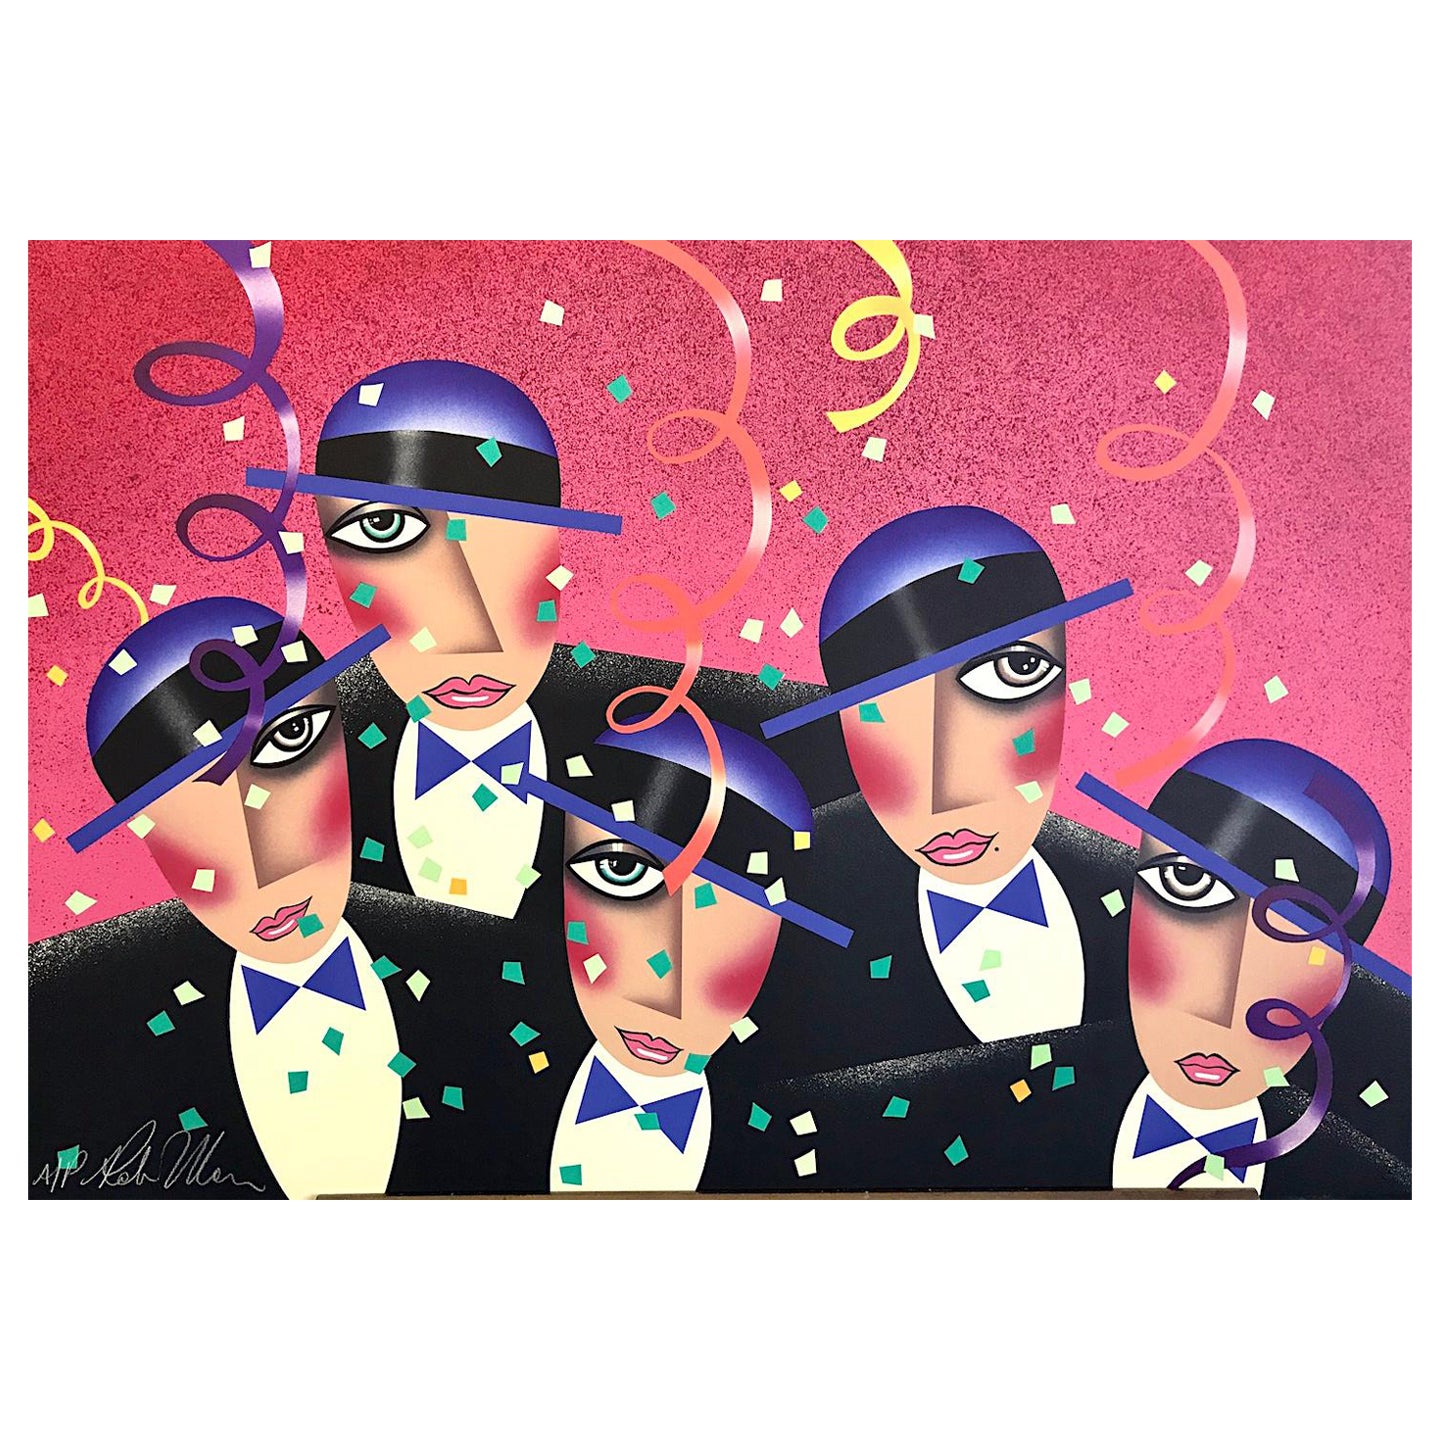 CAST PARTY Signed Lithograph, Party Portrait Theater Broadway Show, Confetti